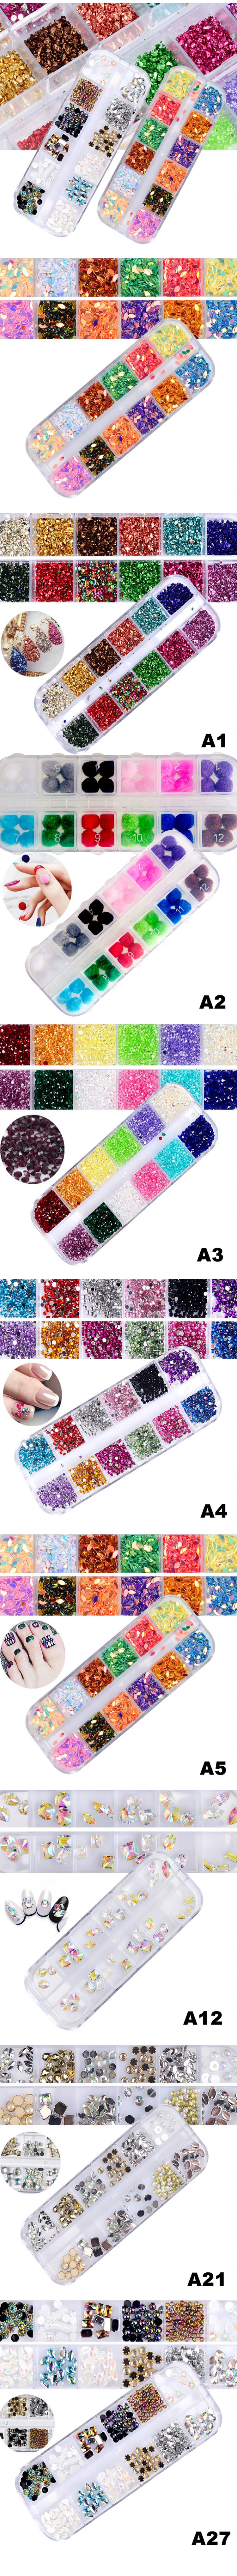 New Top Quality Beauty Fingernails Decoration Nail Art 12 Grid Box Mixed Jewelry Sequins